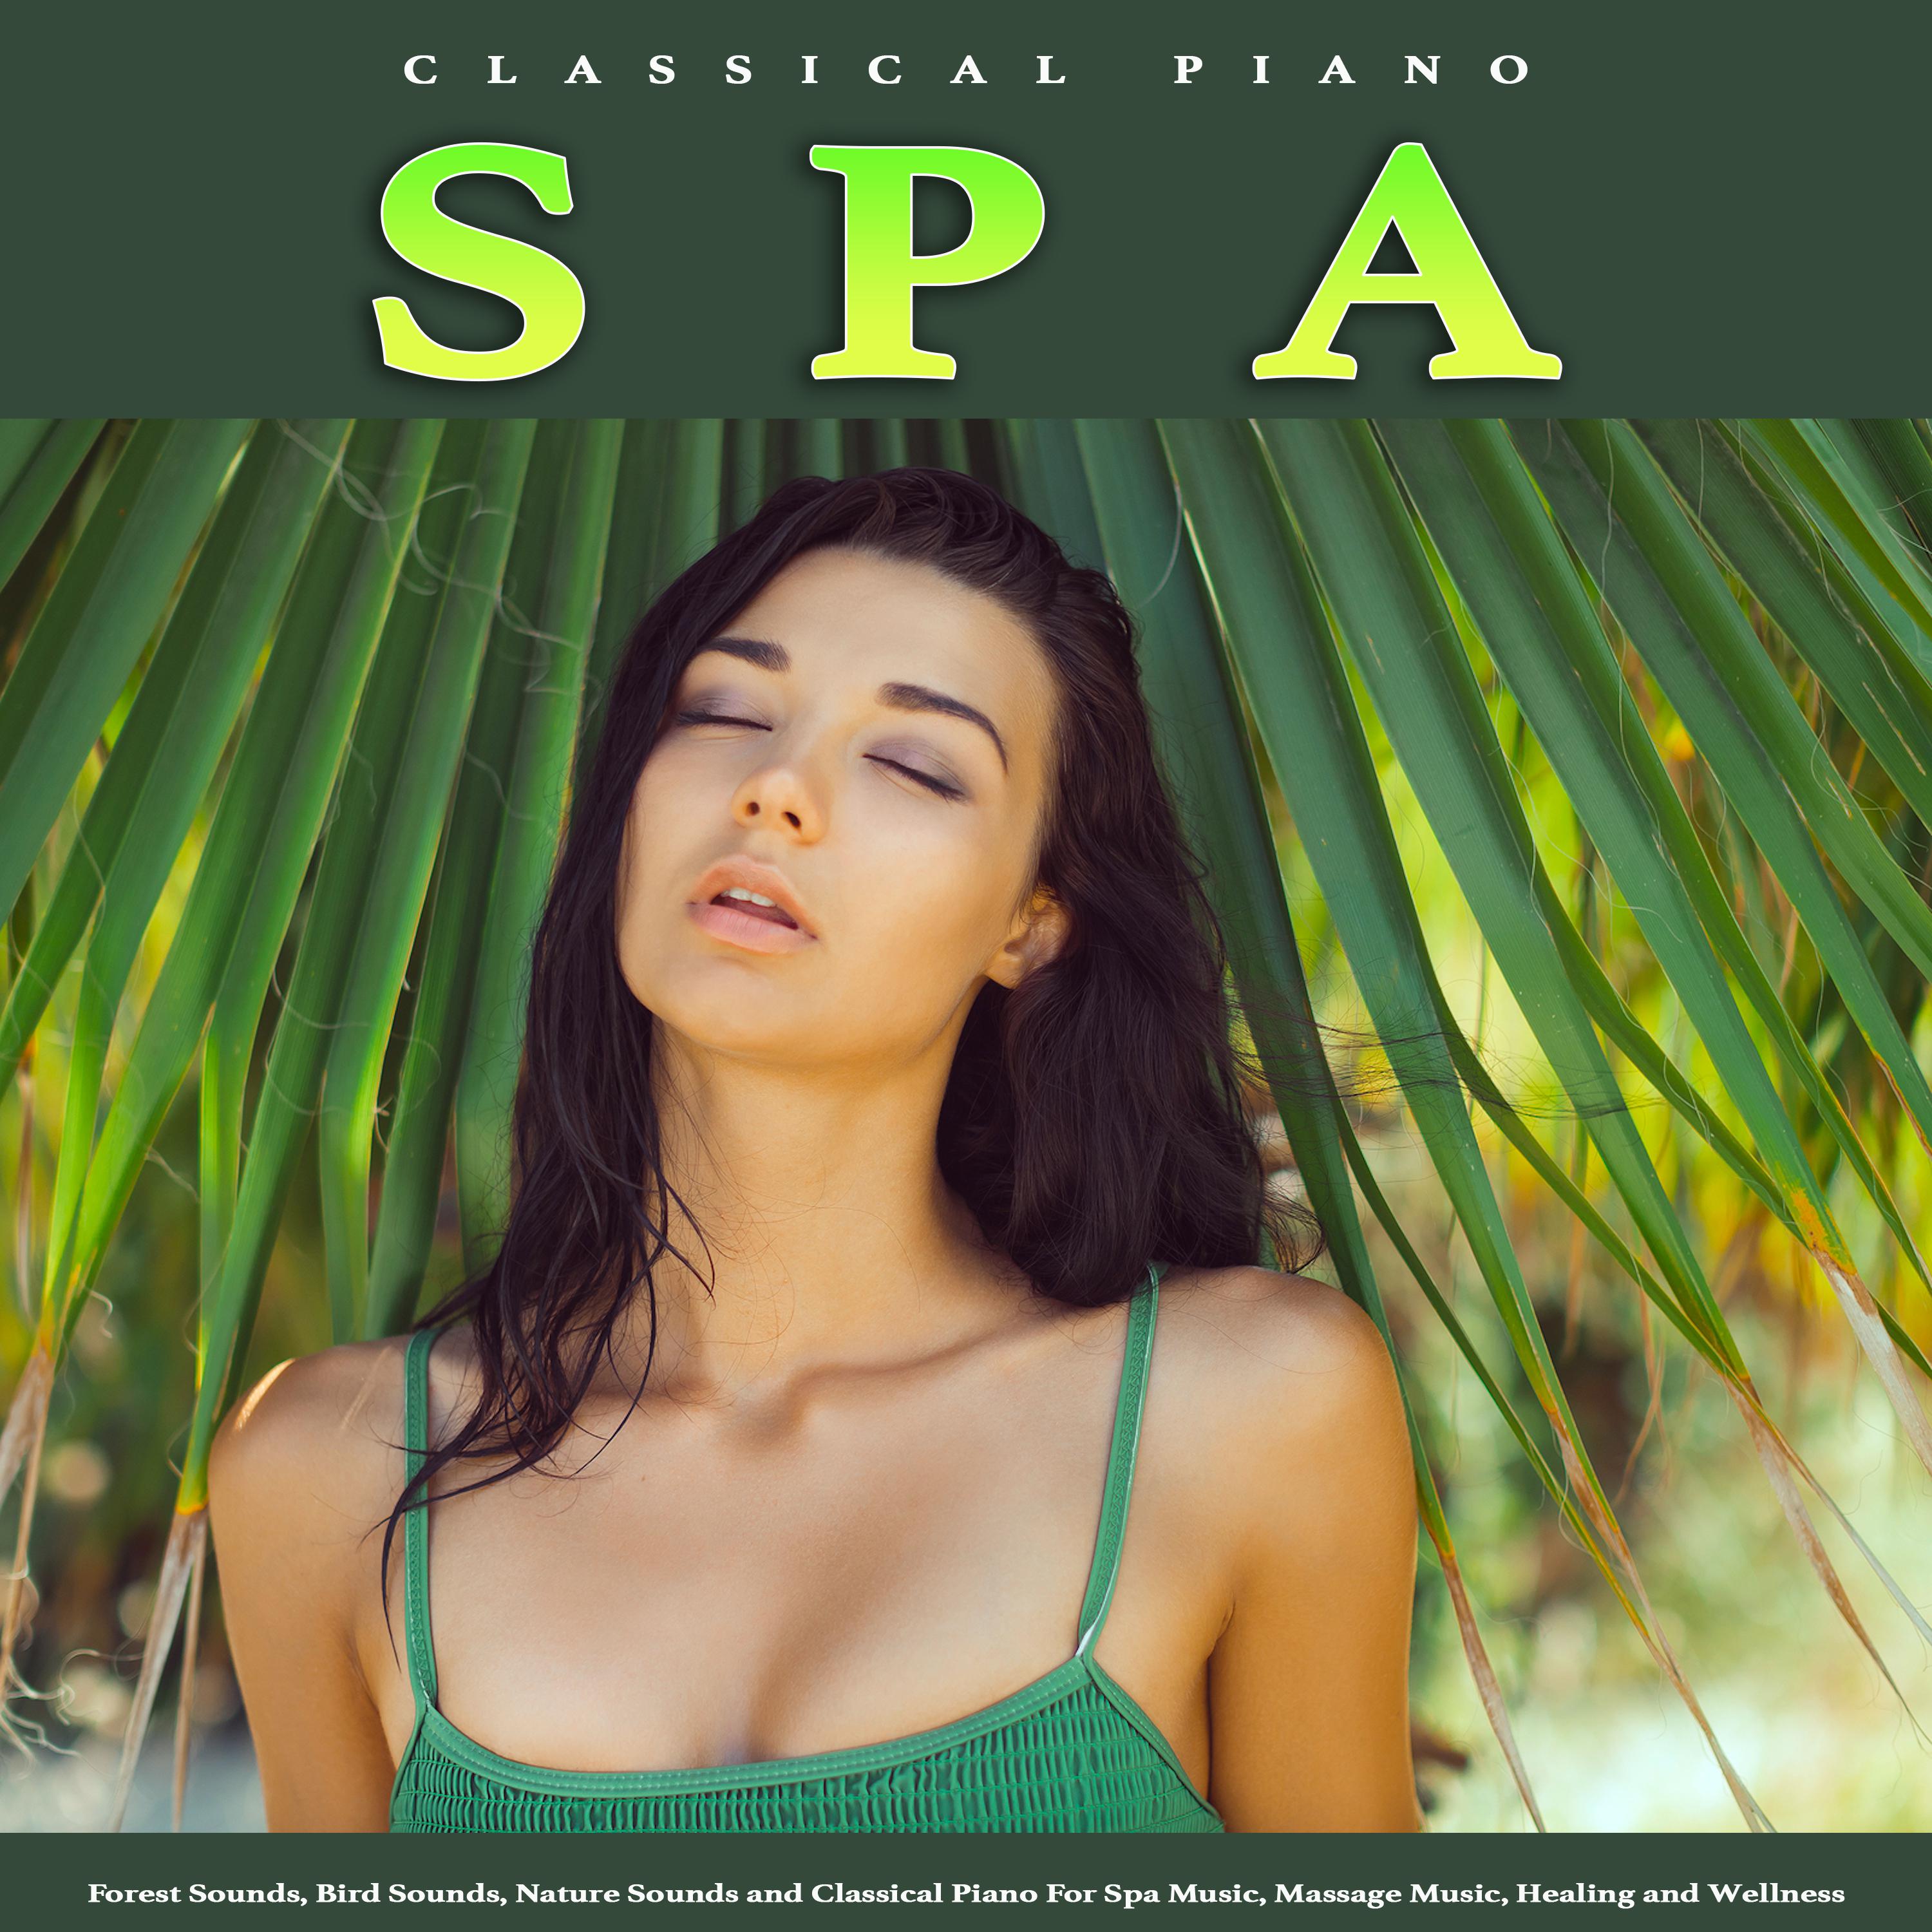 Vocalise, Op.34 - Rachmaninov - Spa Music For Spa - Massage Music - Classical Piano and Nature Sounds For Spa